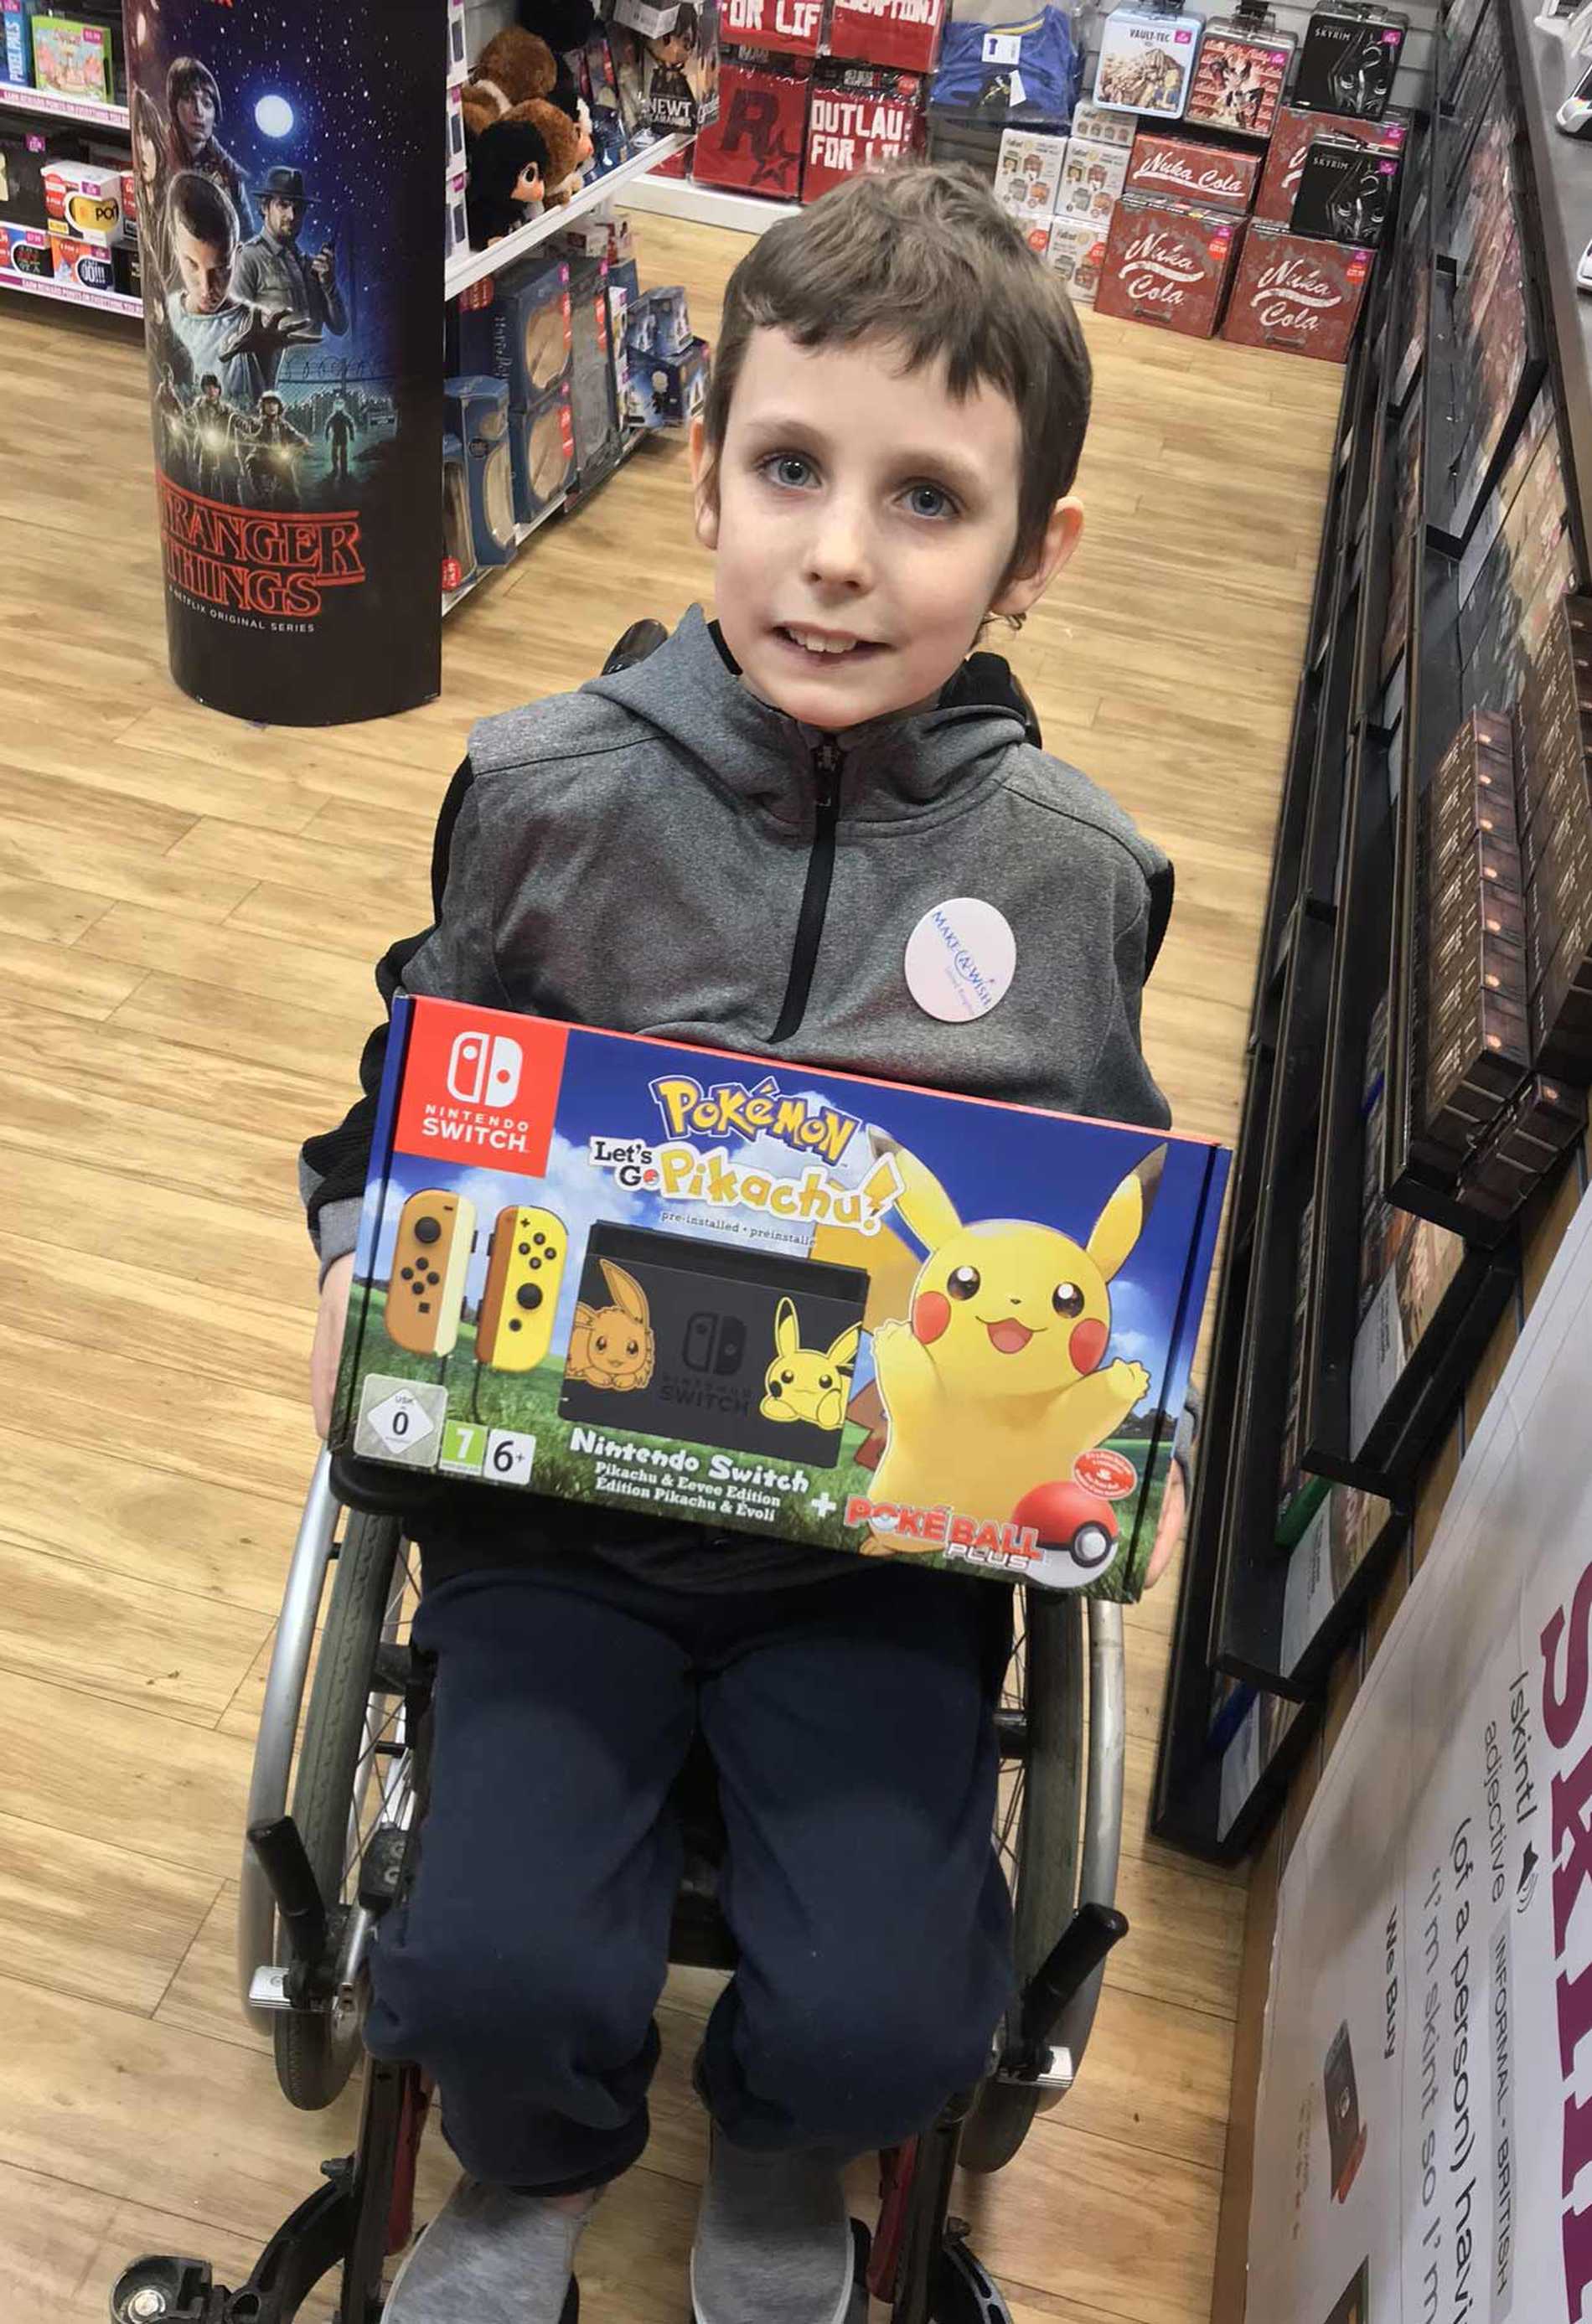 Charlie in the shops holding the Nintendo Switch